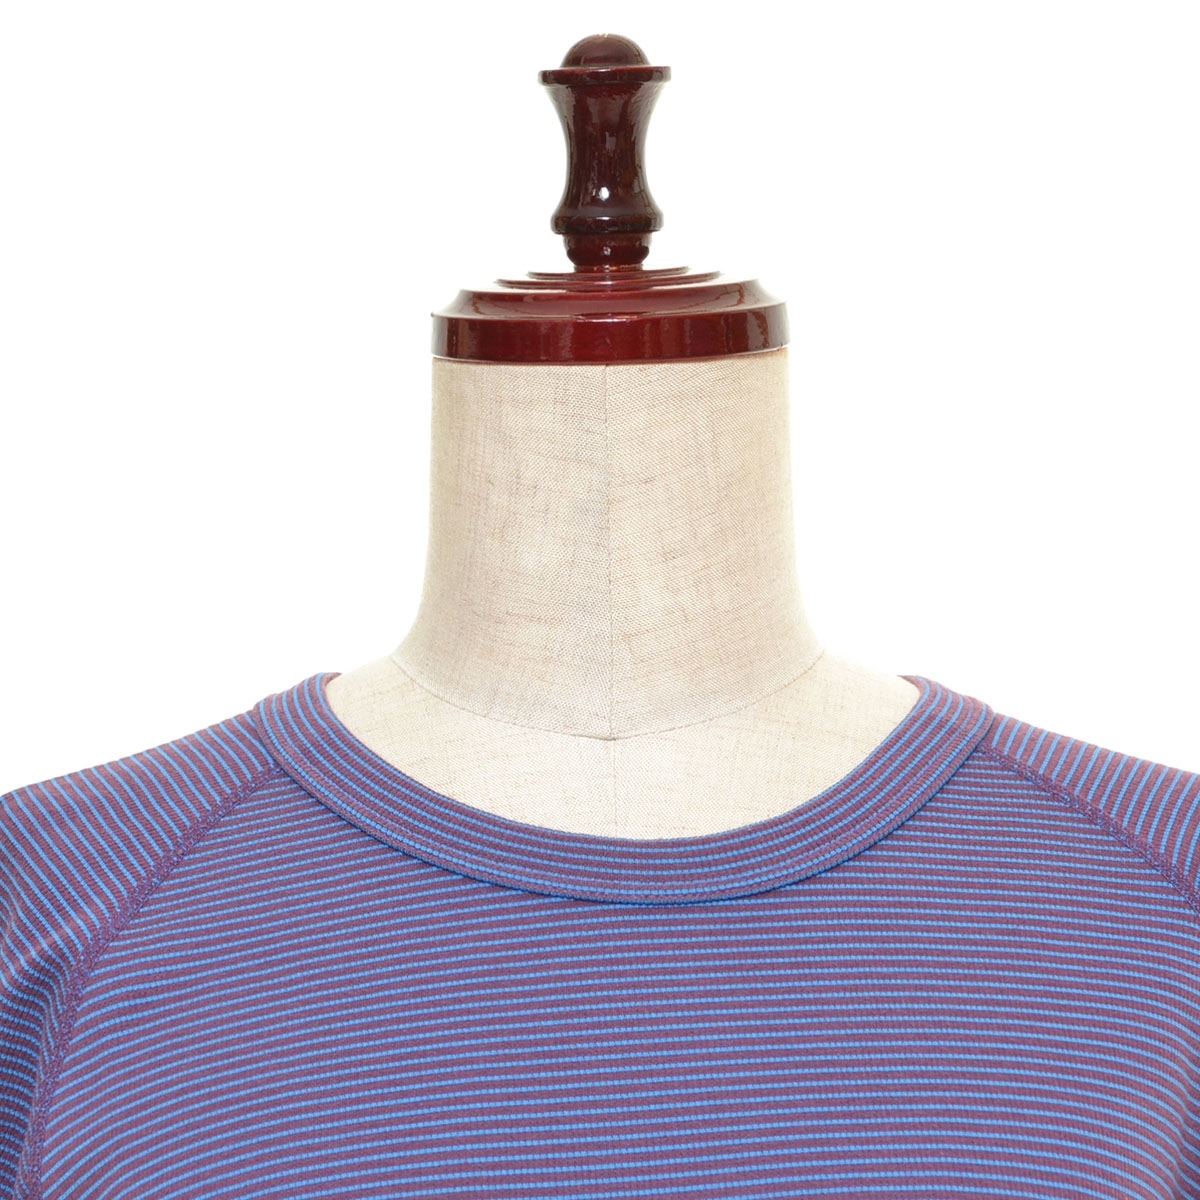 *382848 AIGLE Aigle * long sleeve T shirt cut and sewn size XS lady's made in Japan purple blue border 